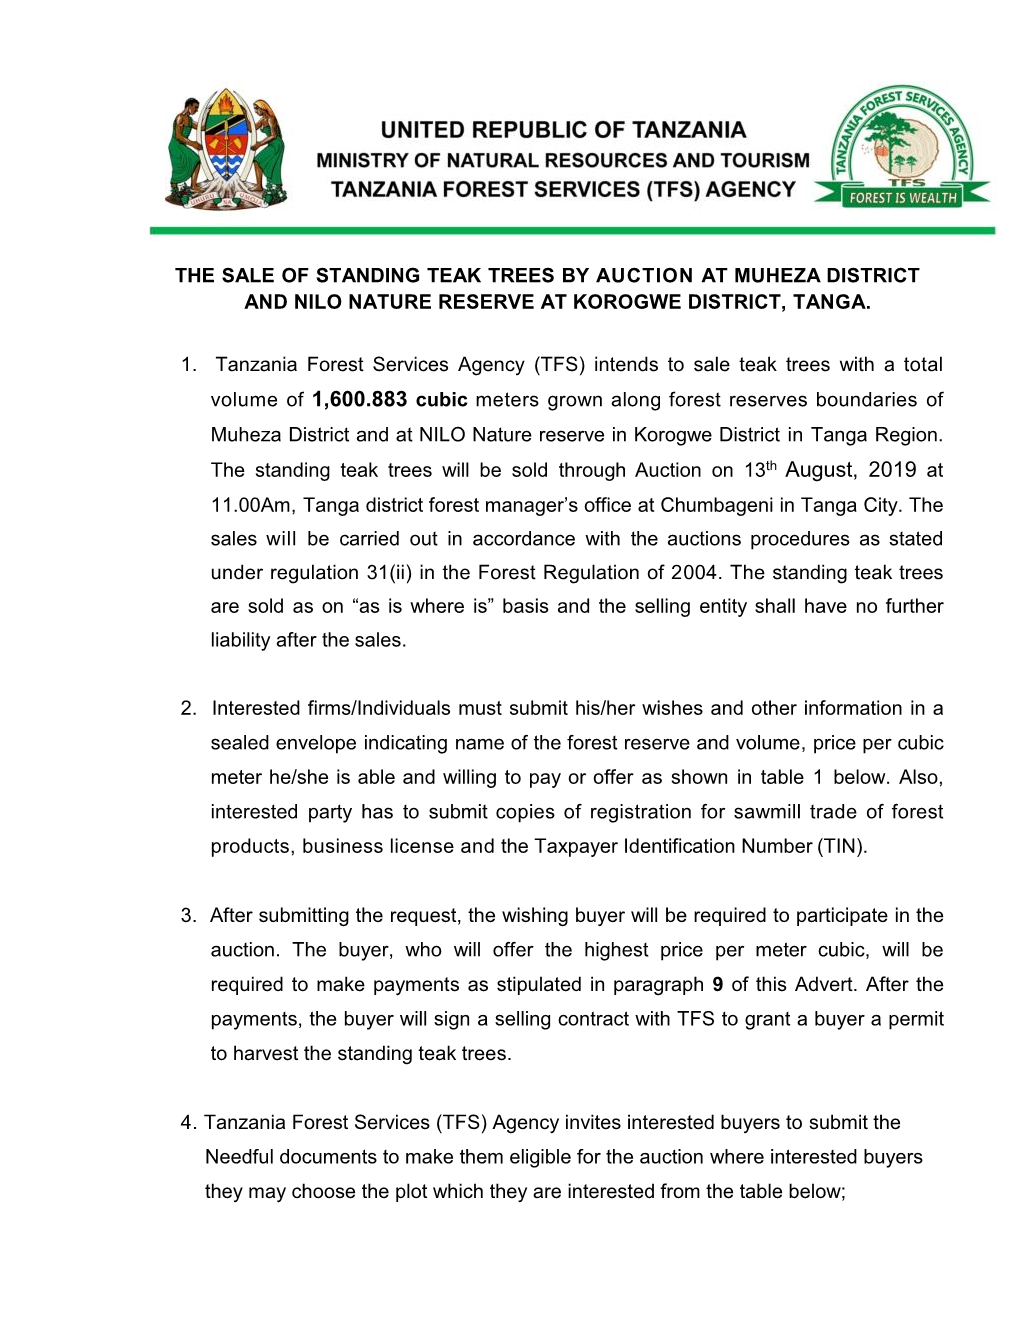 Th August, 2019 at 11.00Am, Tanga District Forest Manager’S Office at Chumbageni in Tanga City